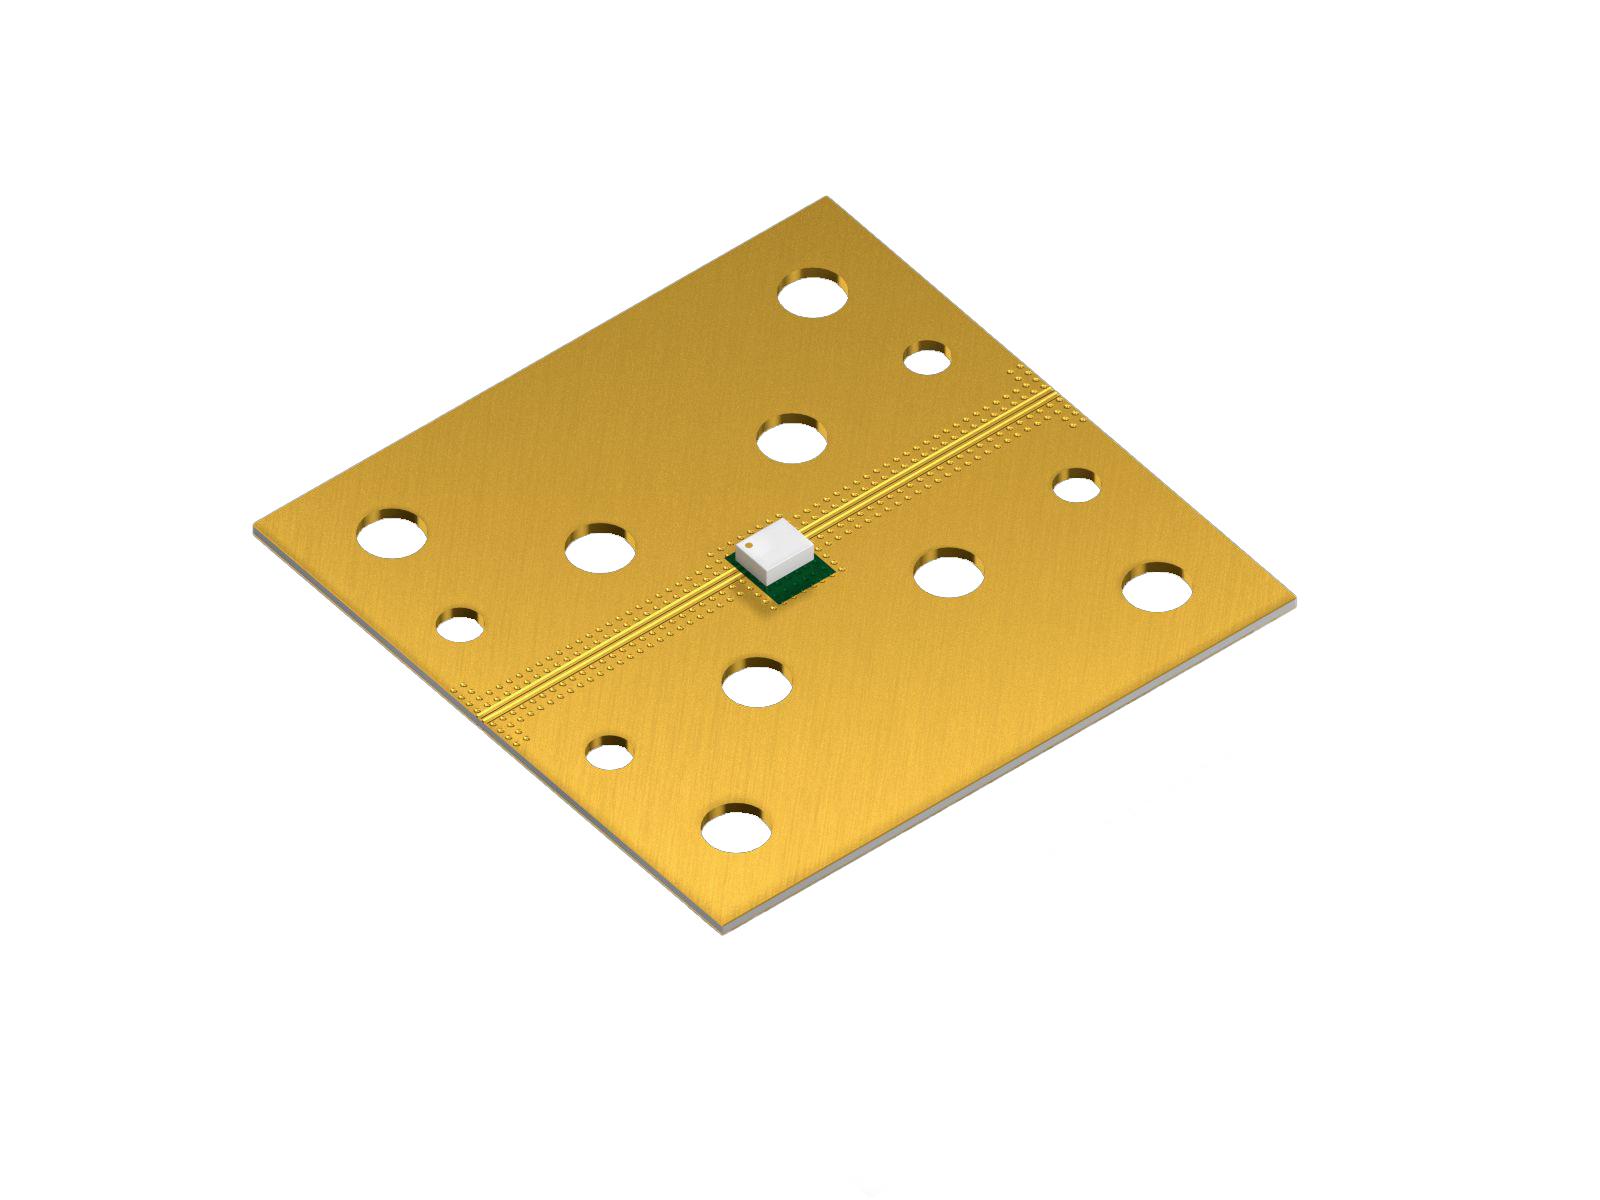 the part number is MMCB3528G0T-0041A1 SAMPLE WITH TEST BOARD